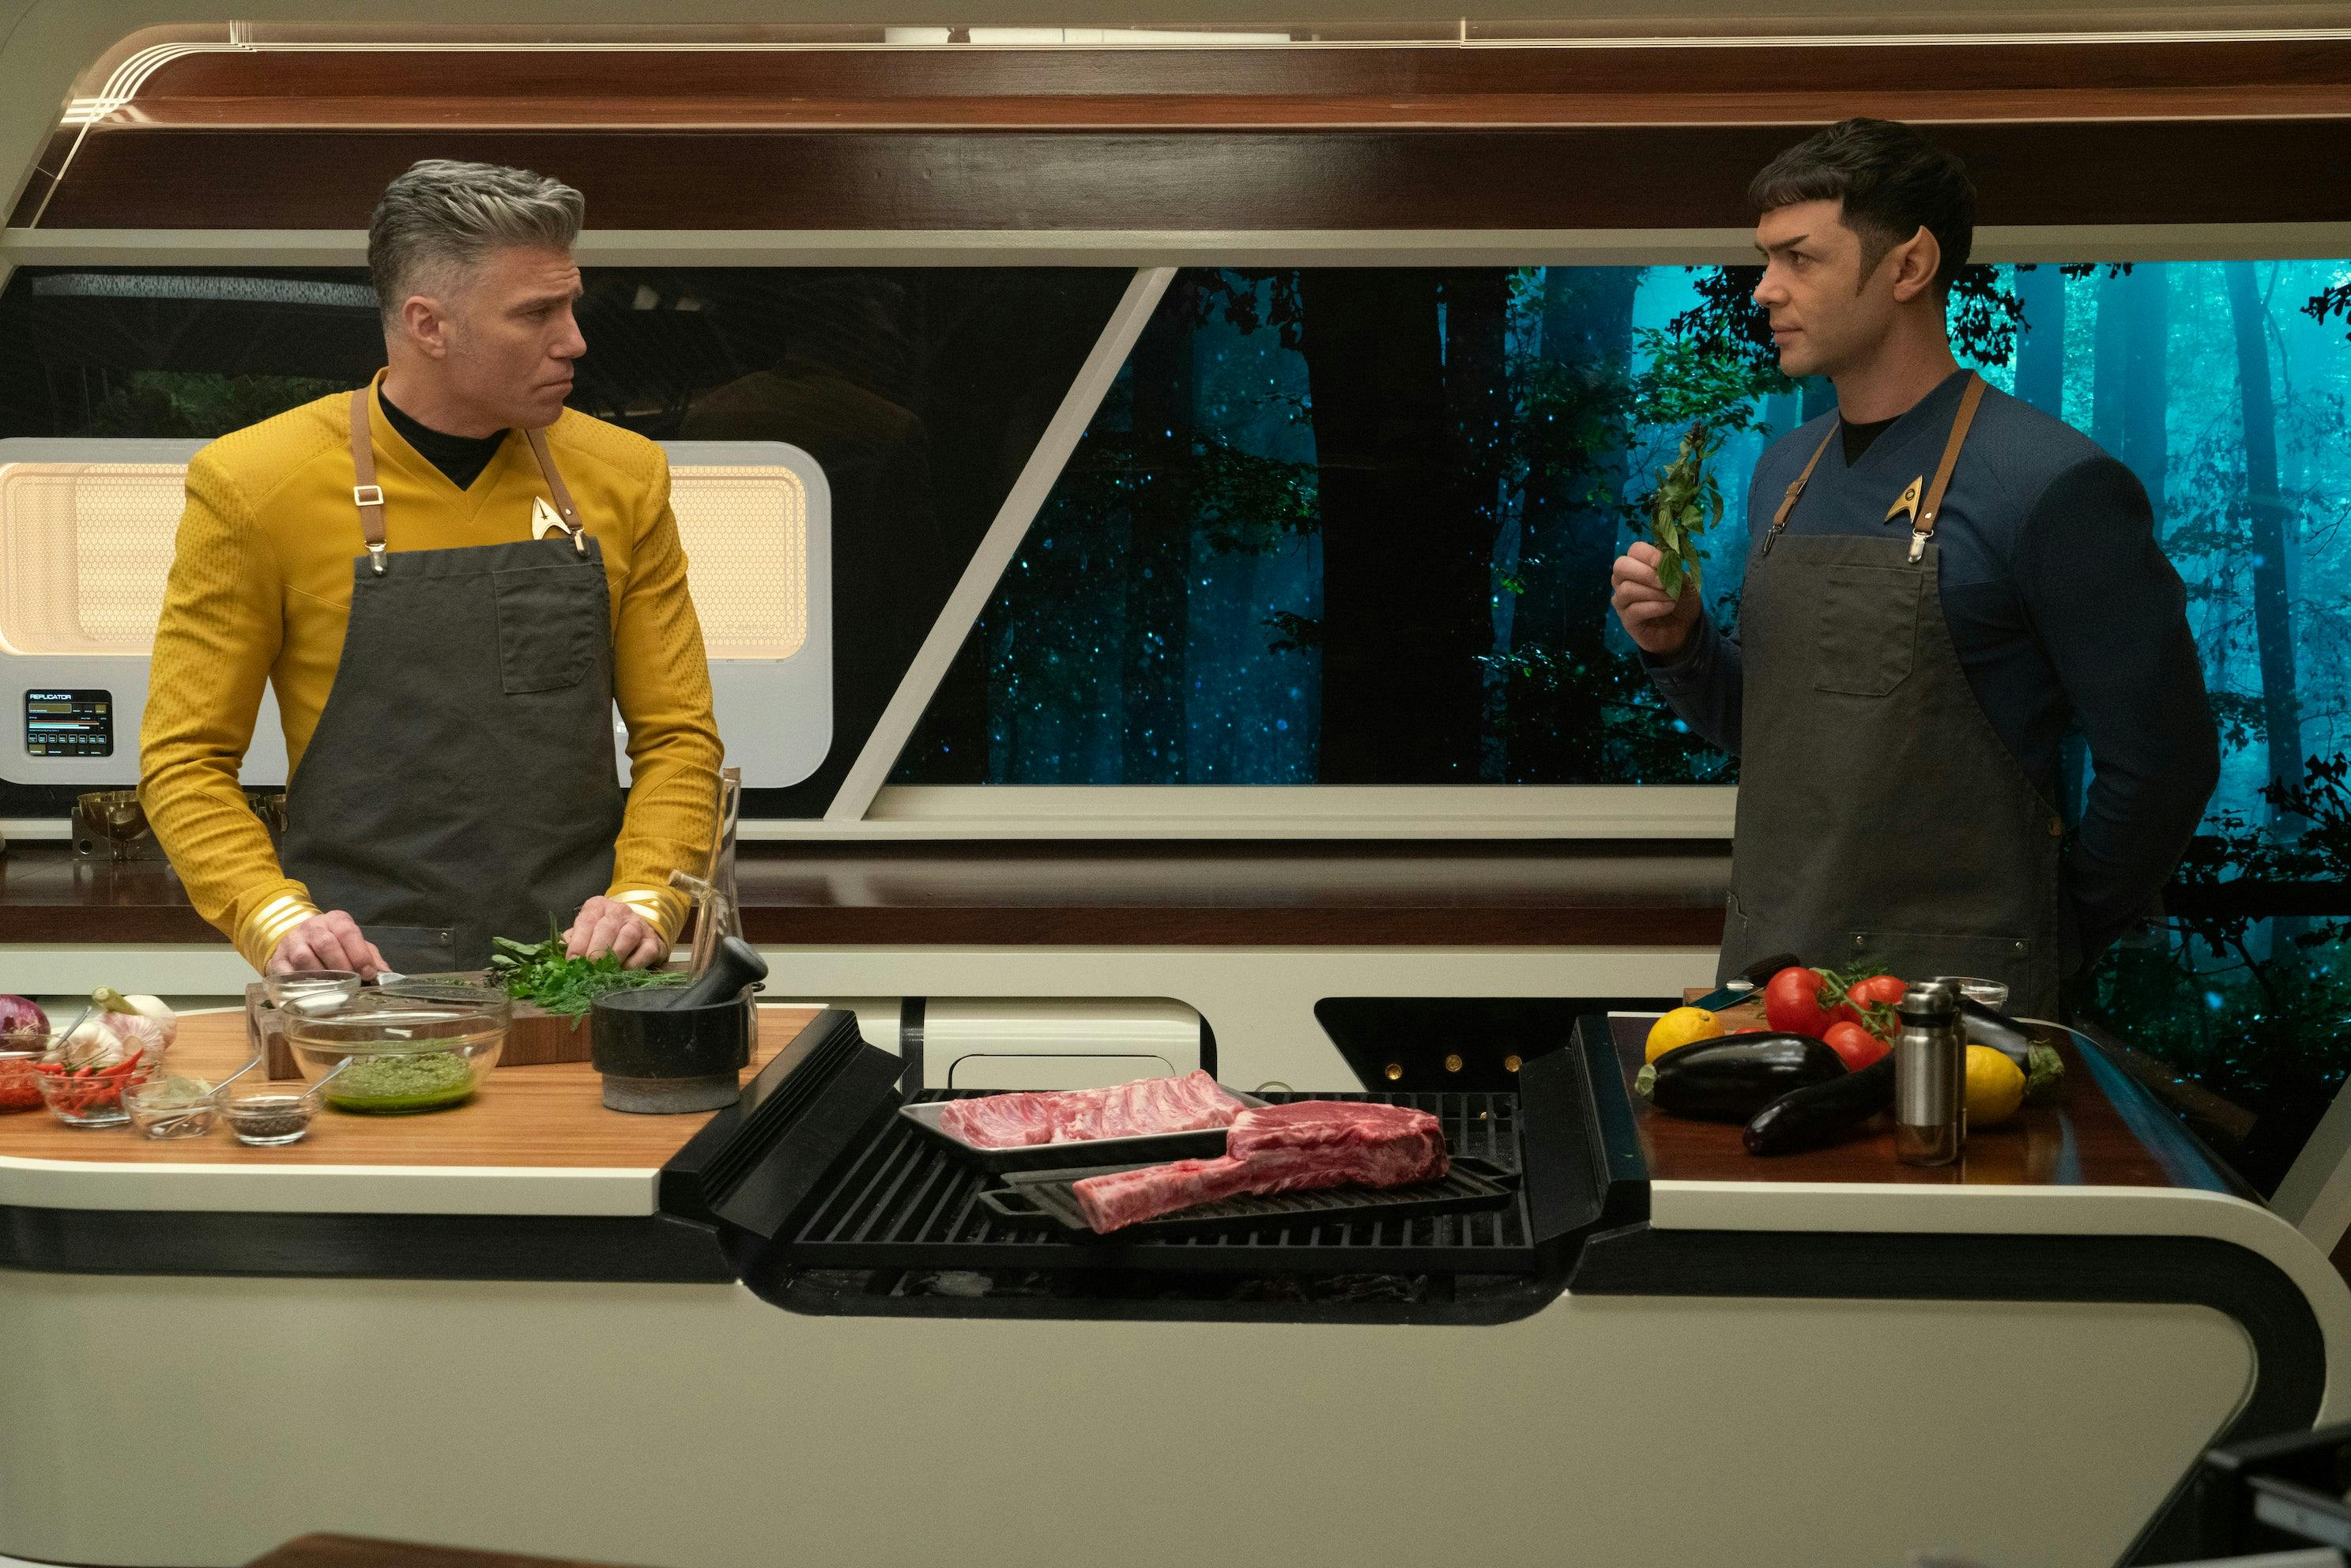 In the captain's quarters, Pike and Spock stand in the kitchen with aprons on preparing a meal in 'Charades'